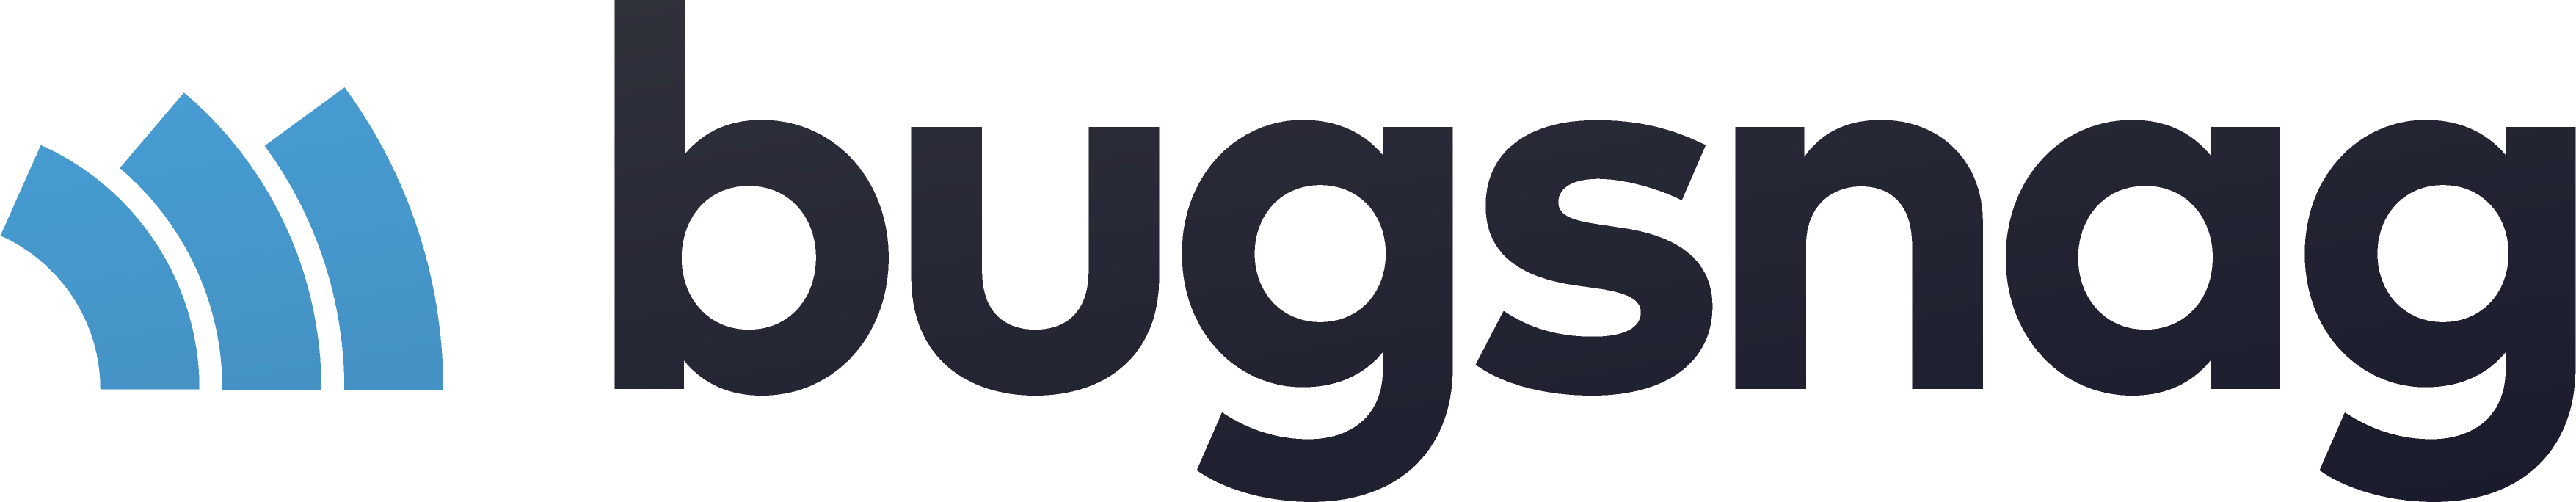 Bugsnag Uses HashiCorp Terraform to Quickly Provision and Safely Maintain Their Infrastructure